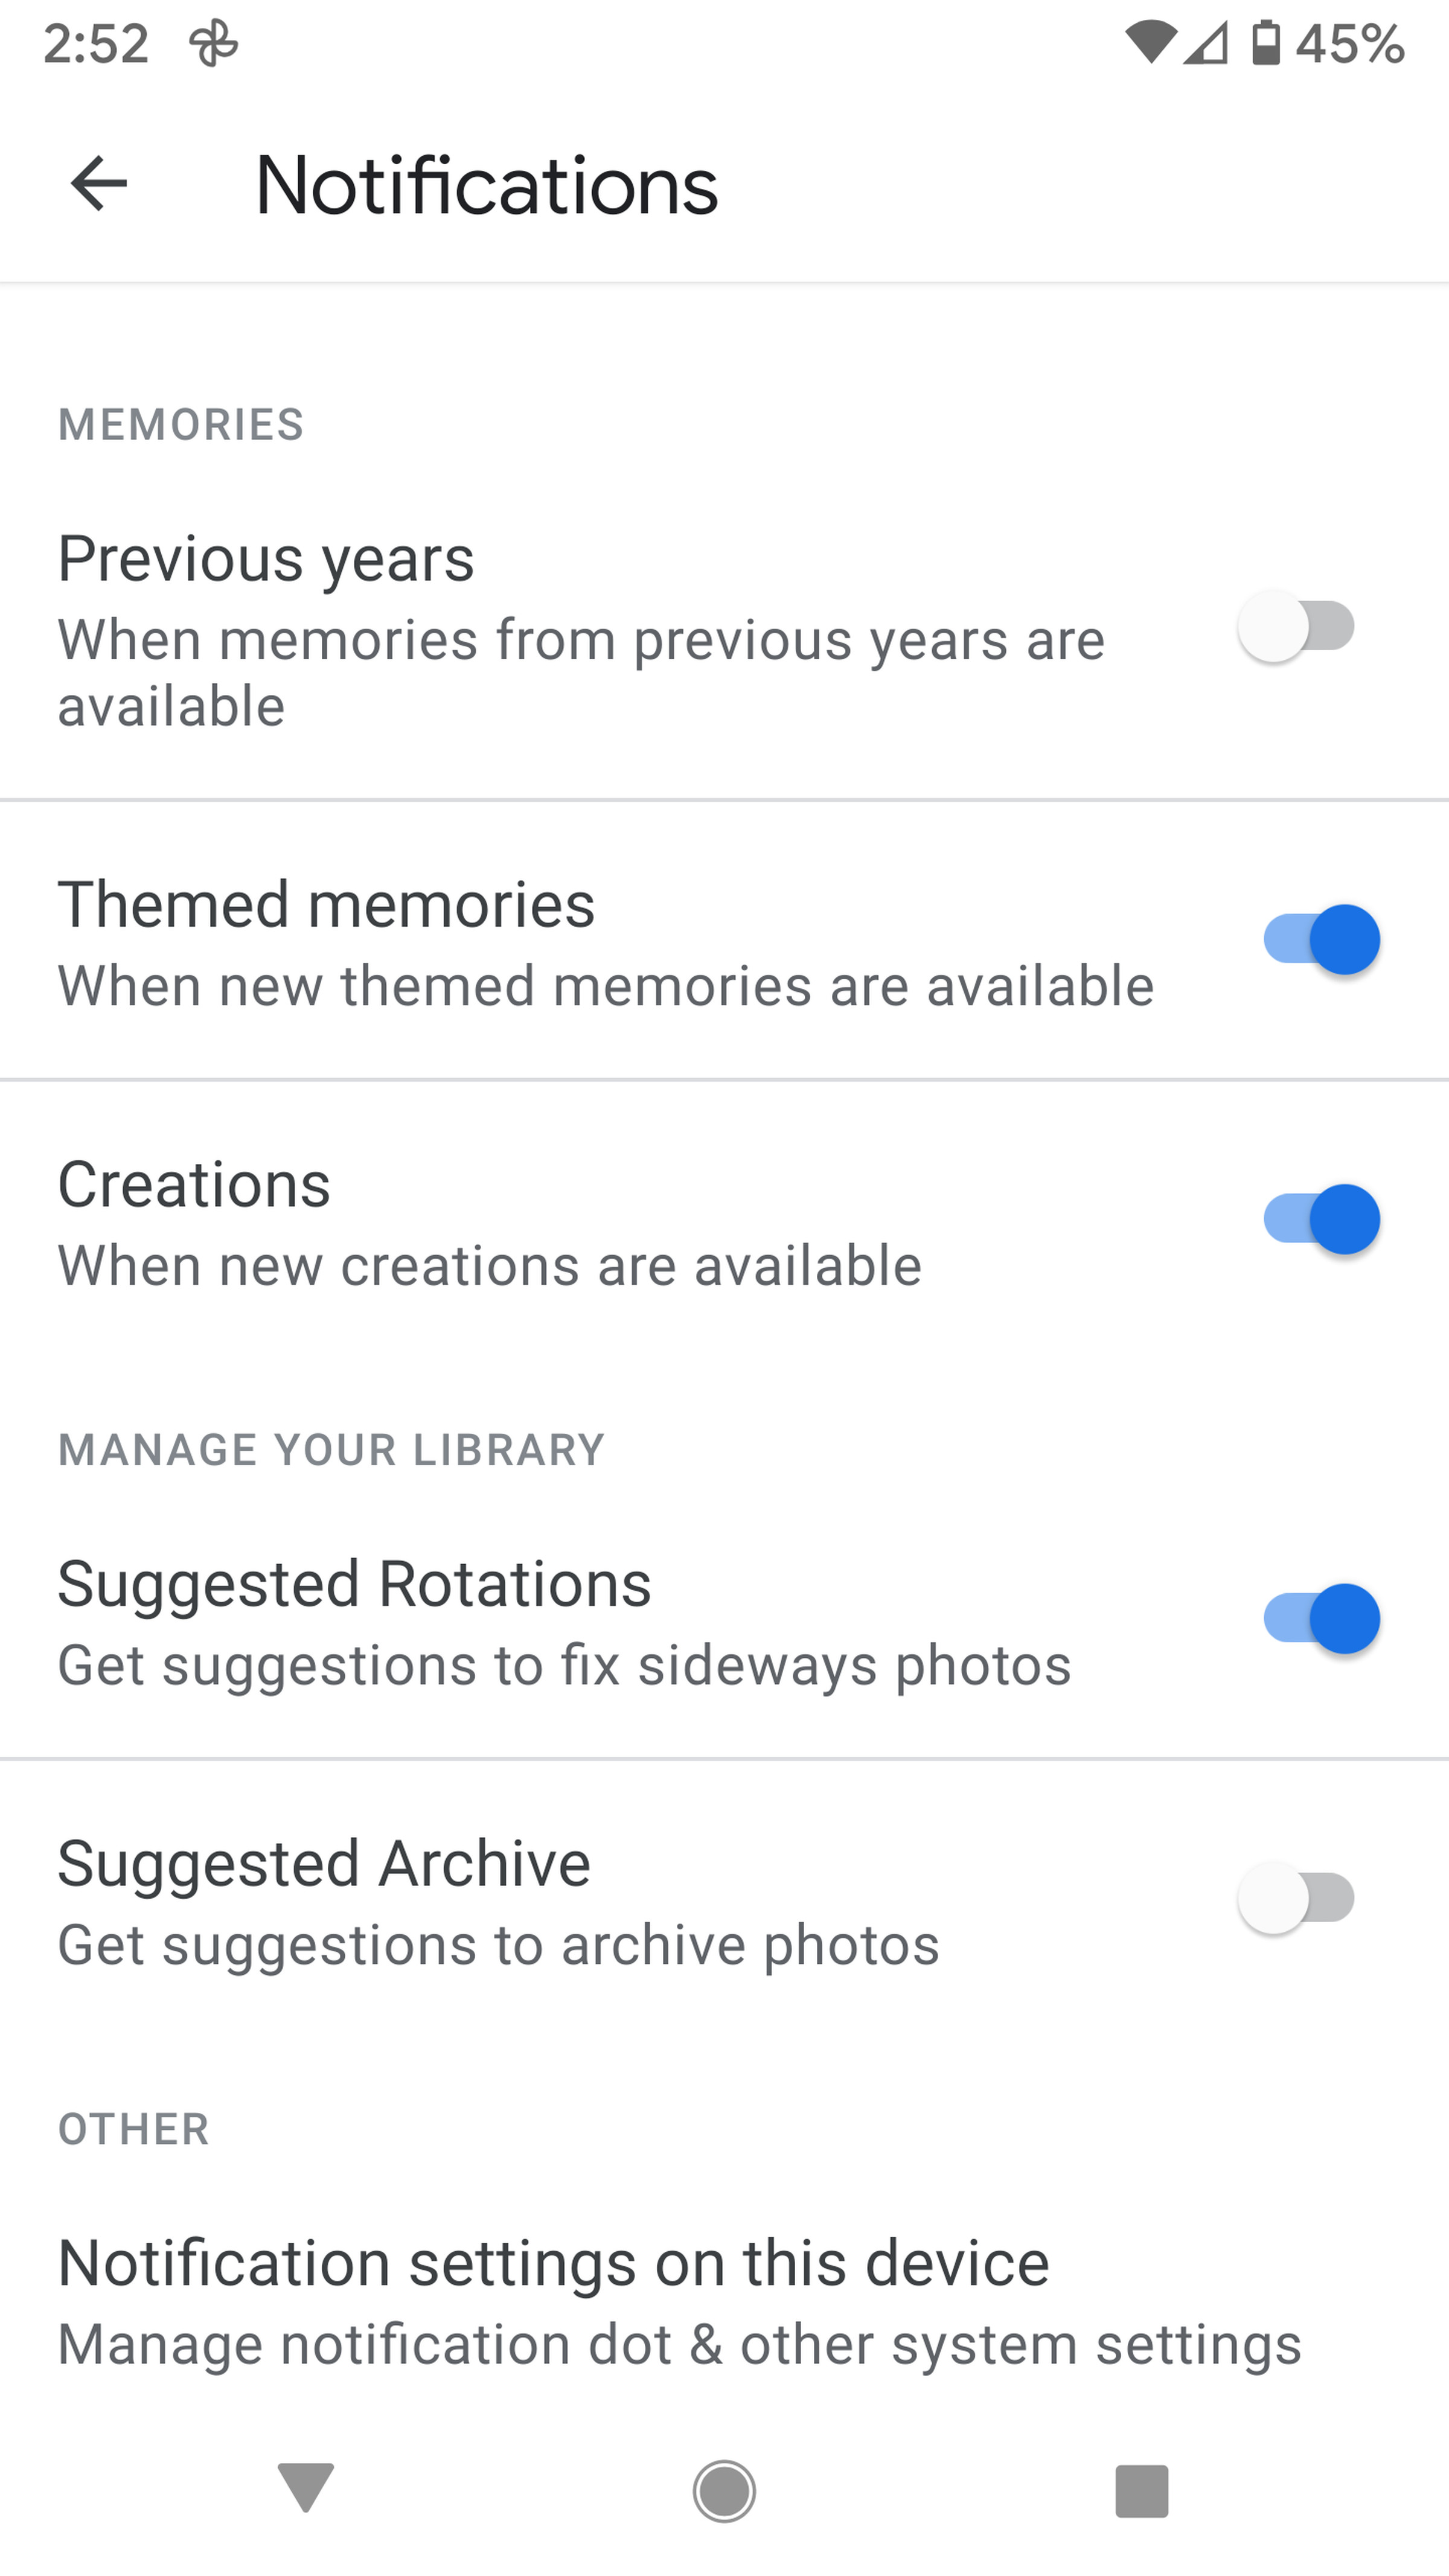 You can also choose when you want to see Memories notifications.